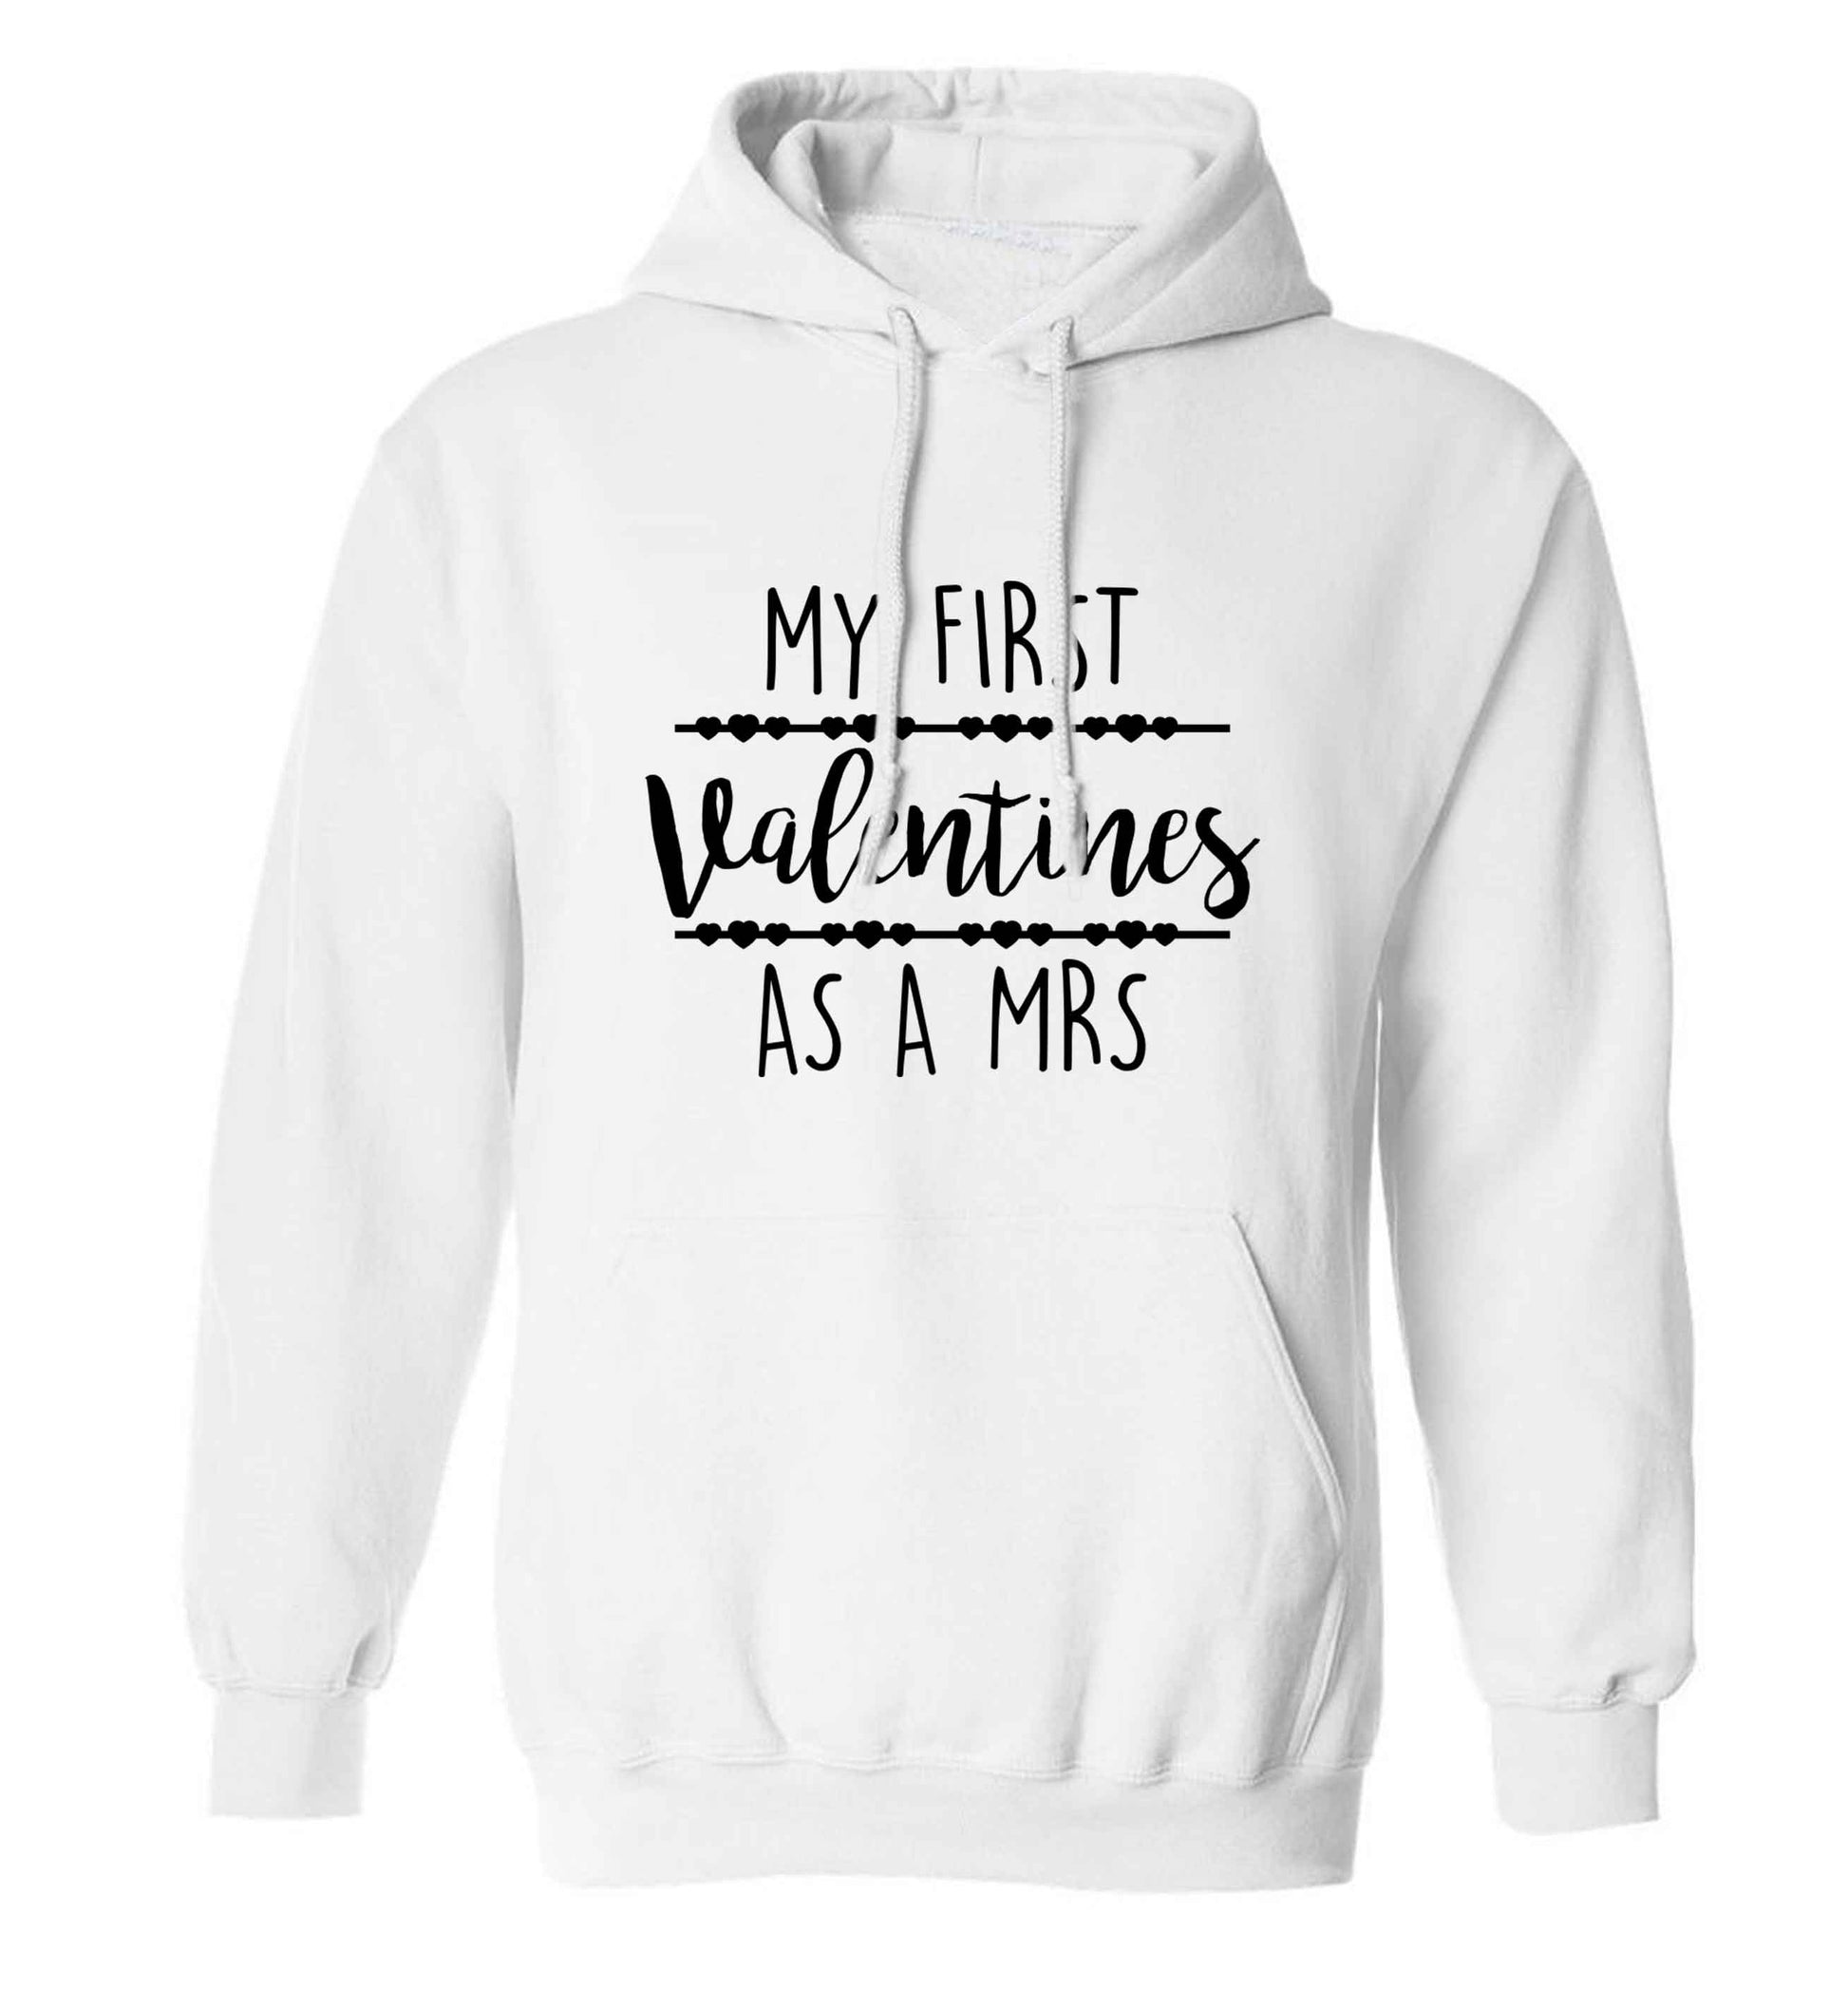 My first valentines as a Mrs adults unisex white hoodie 2XL